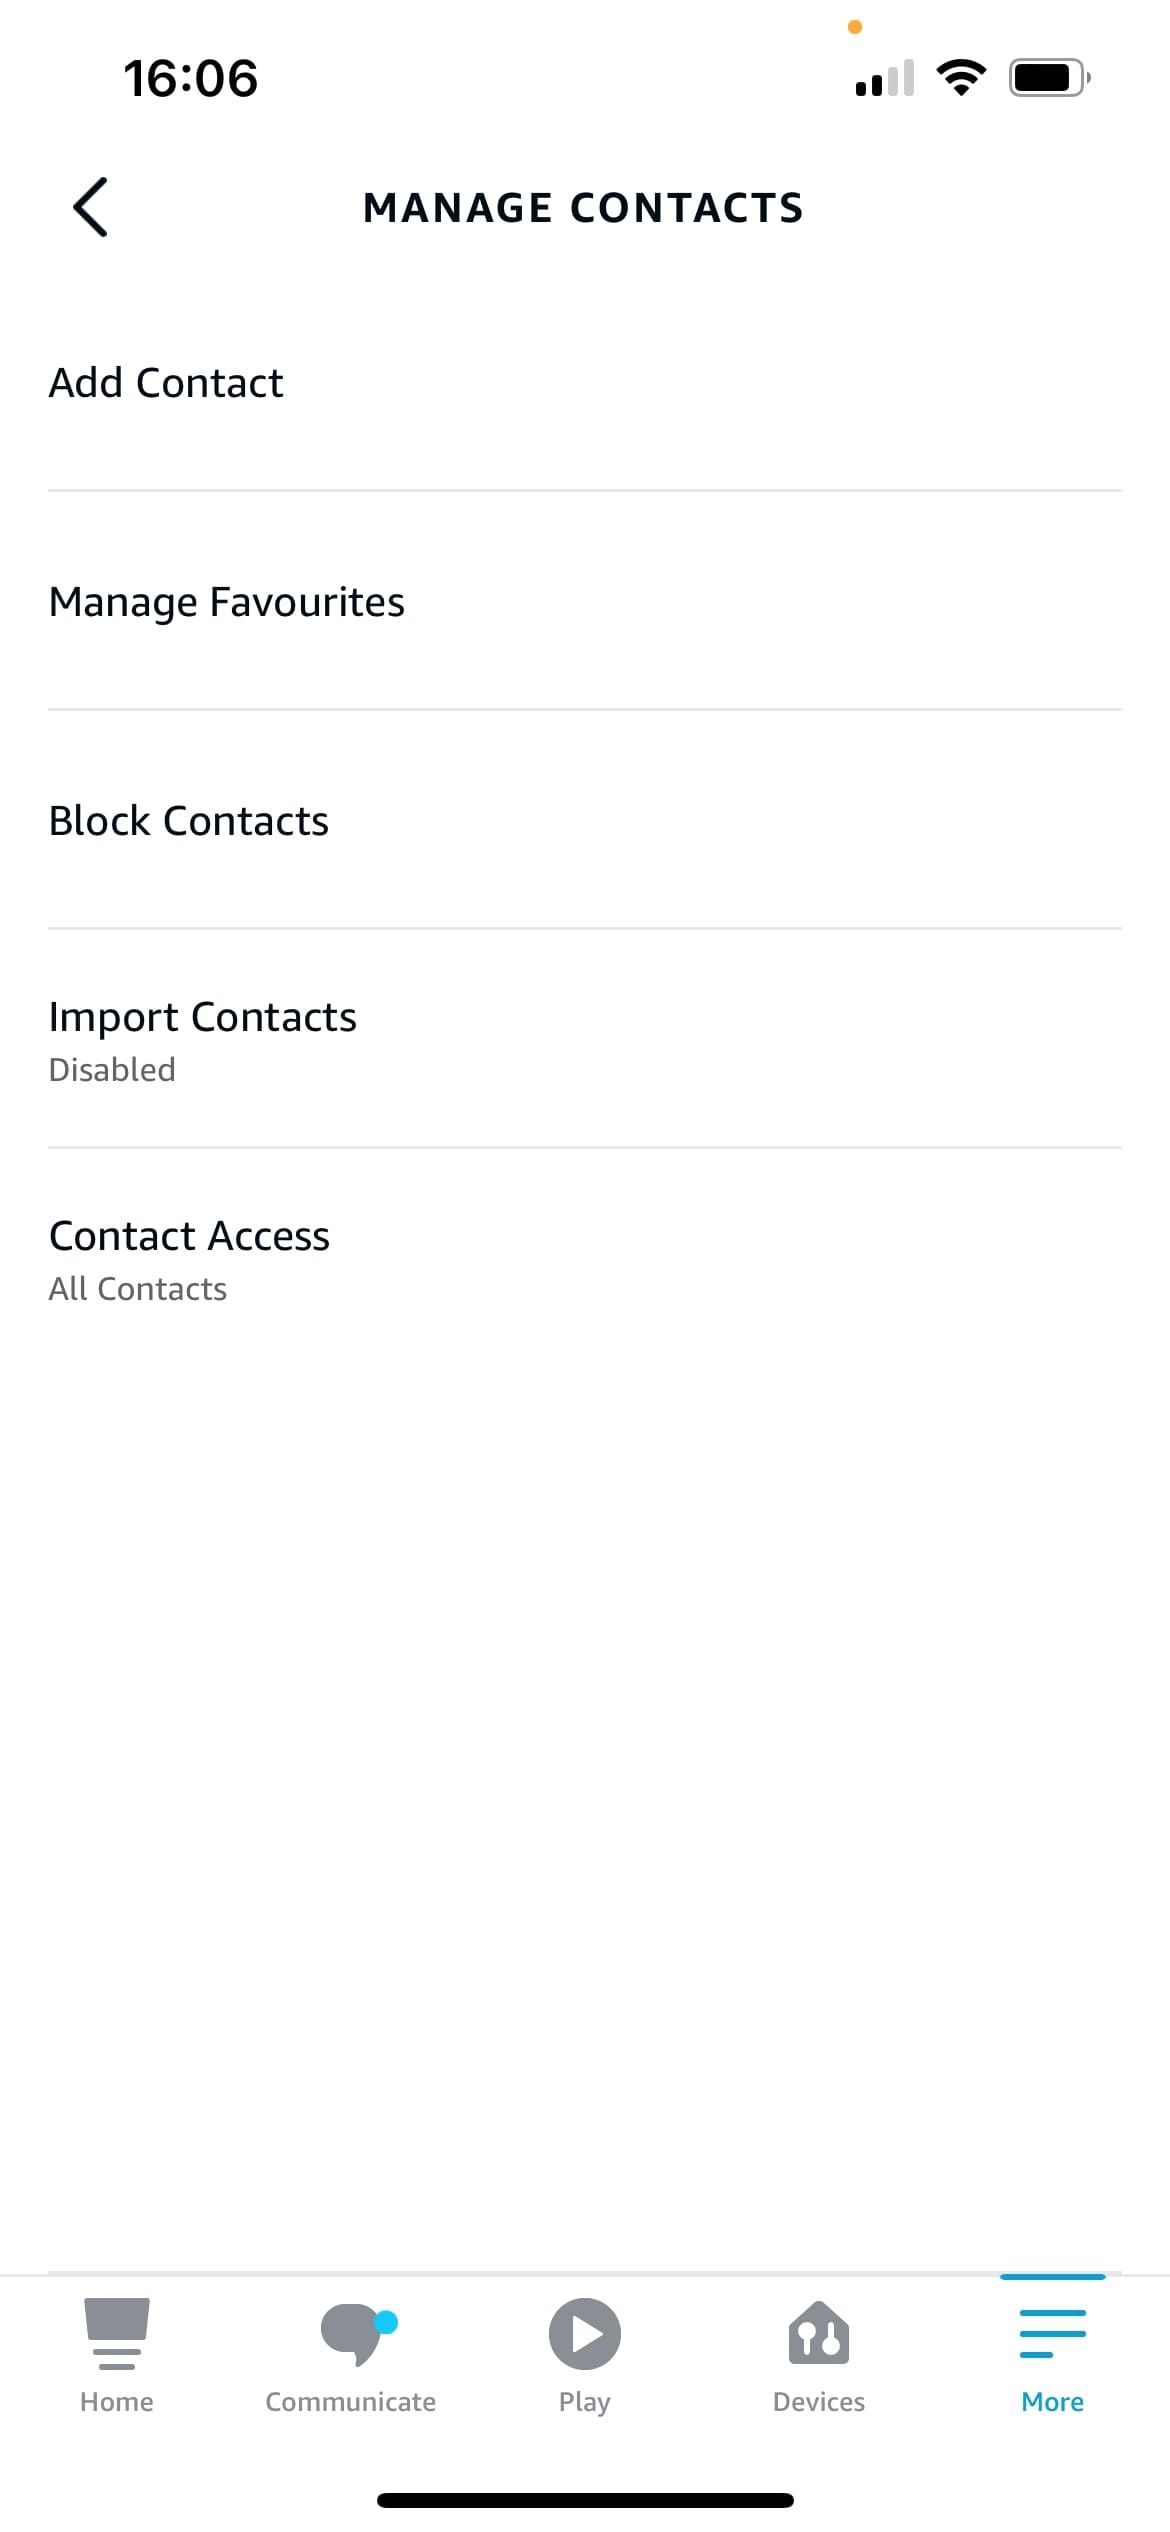 Alexa Manage Contacts page